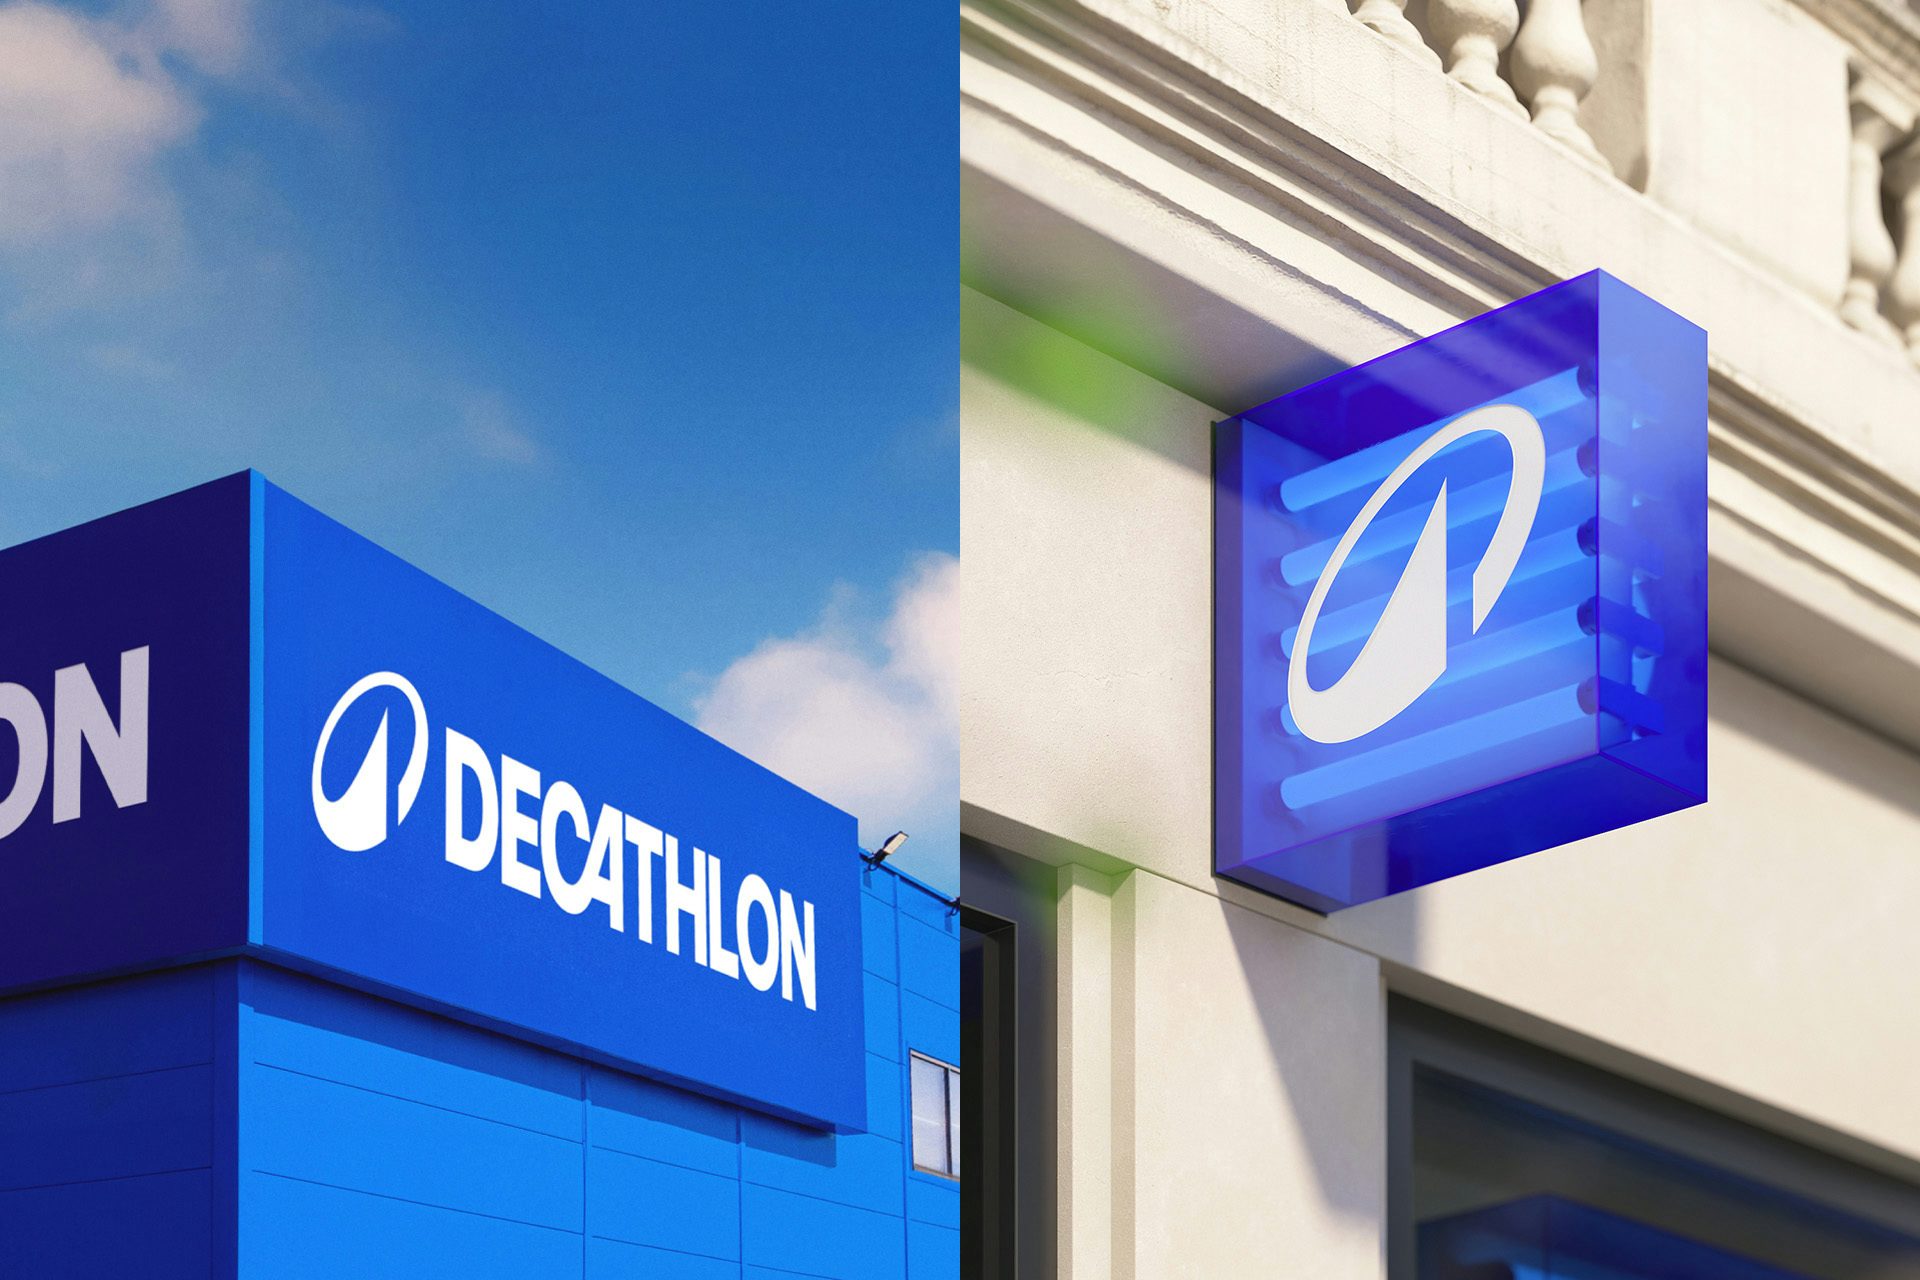 Image shows Decathlon's new circular logo and wordmark on store signage, created as part of its new branding